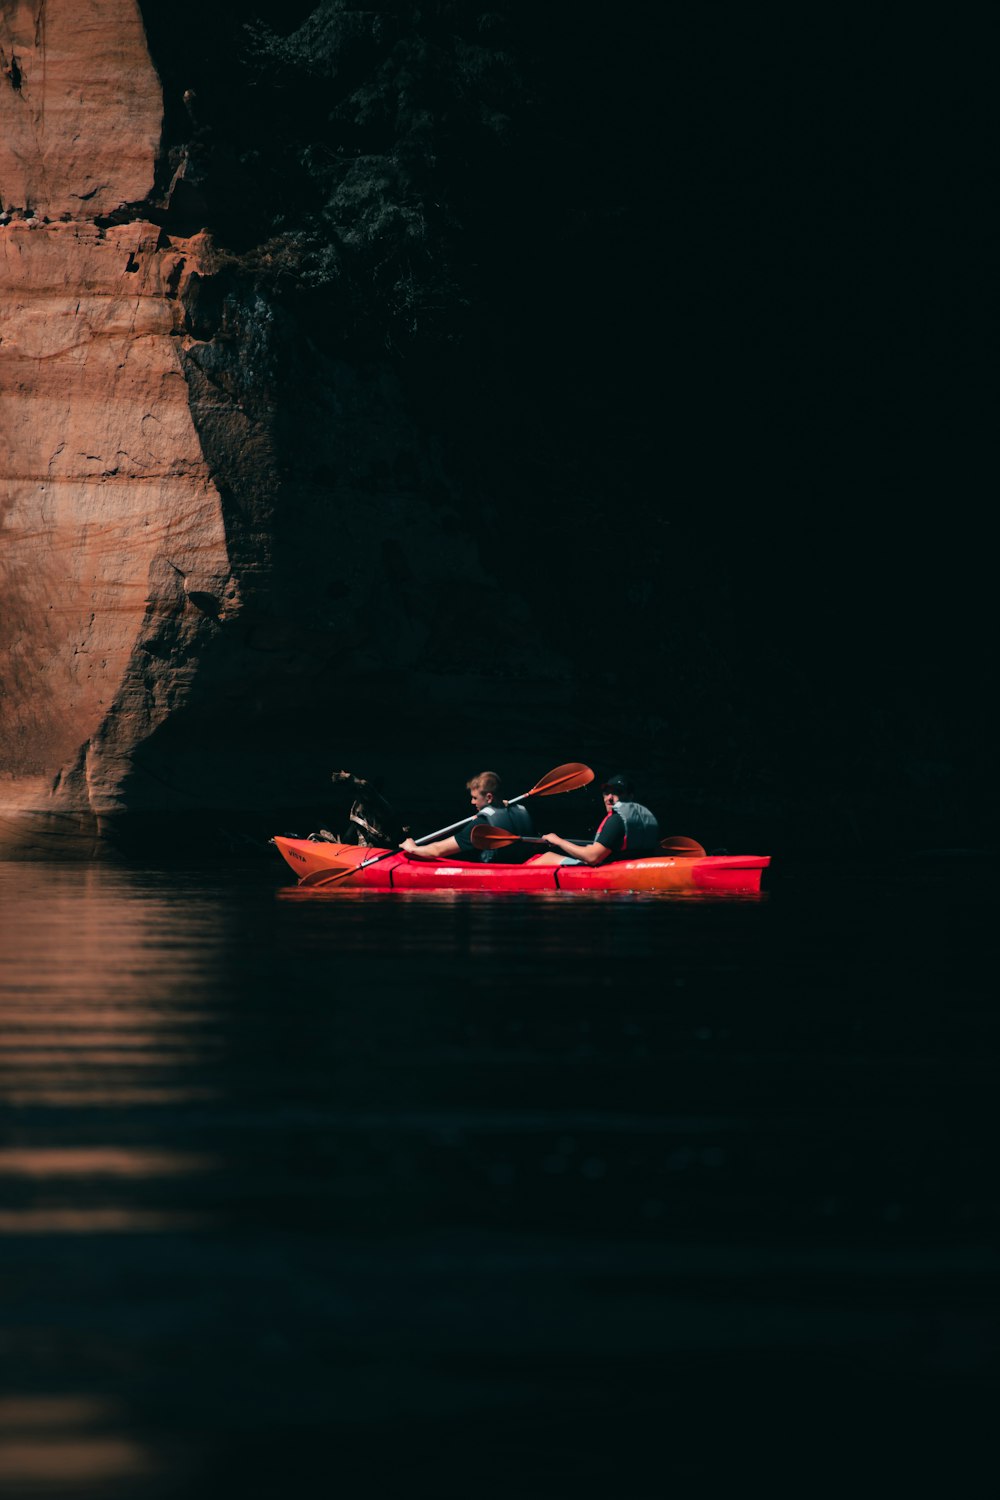 a man and woman in a kayak in a dark cave